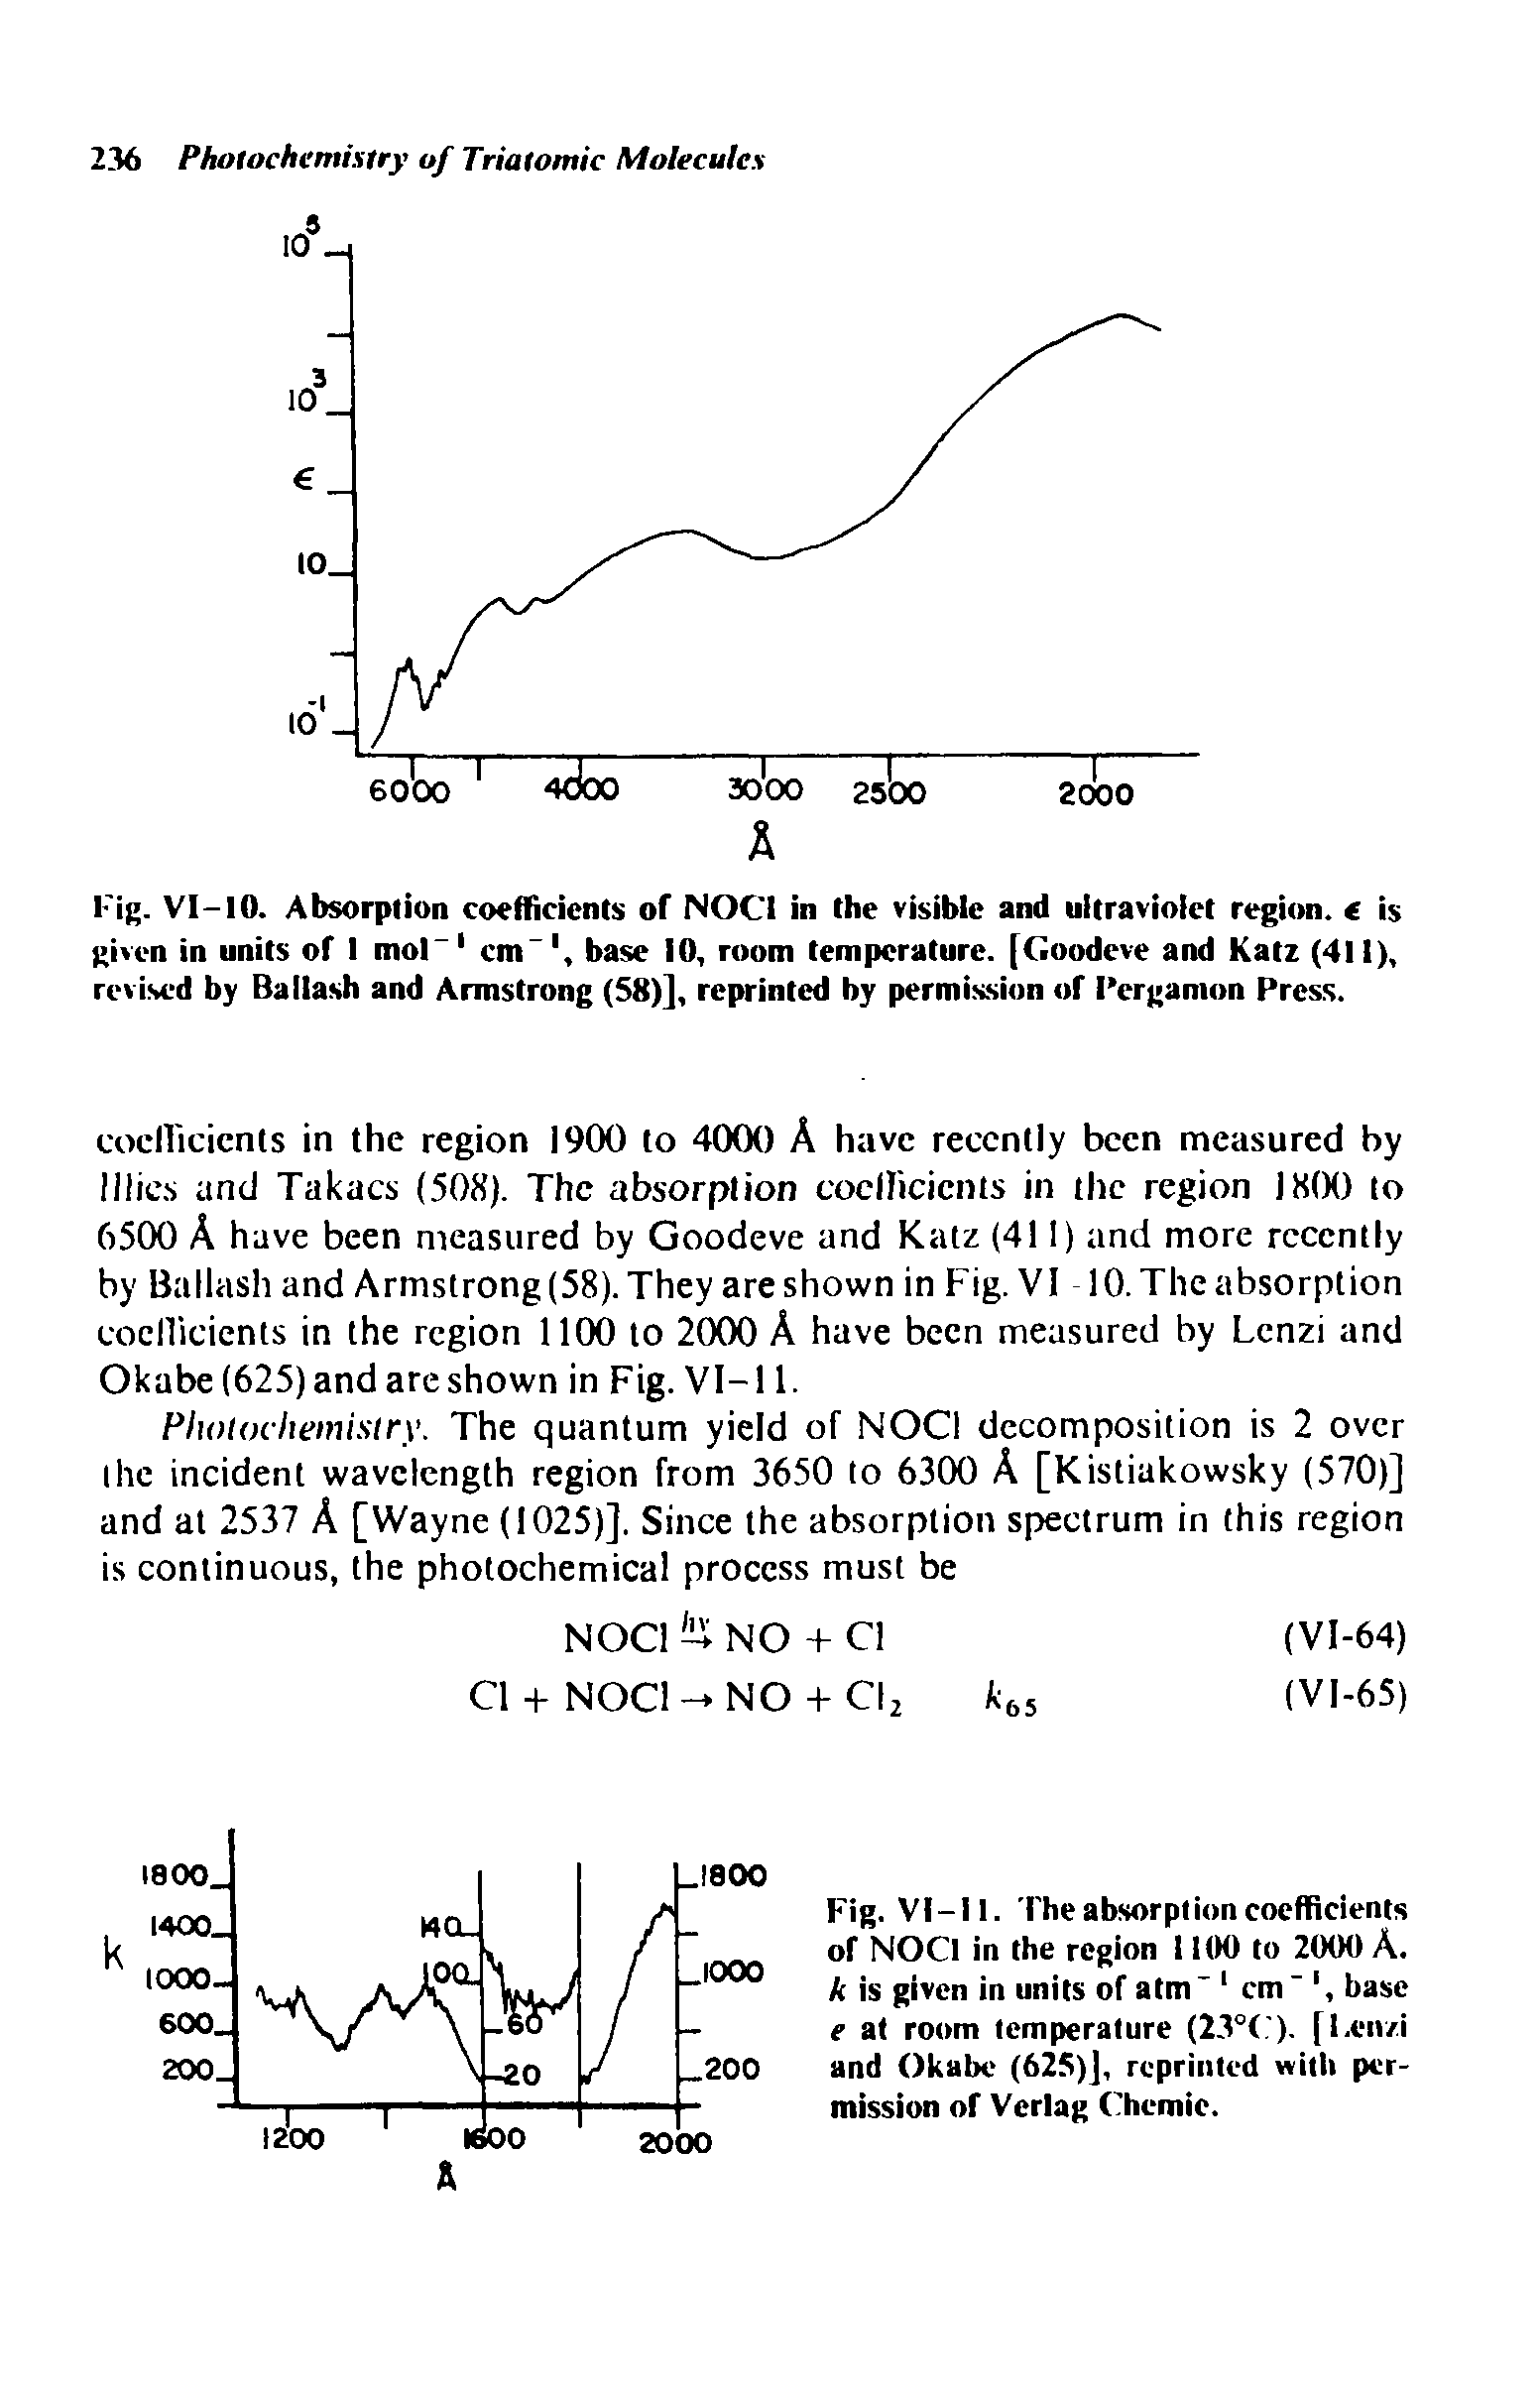 Fig. VI-10. Absorption coefficients of NOC1 in the visible and ultraviolet region, < is given in units of 1 mol-1 cm-1, base 10, room temperature. [Goodeve and Katz (411), revised by Ballash and Armstrong (58)], reprinted by permission of Pergamon Press.